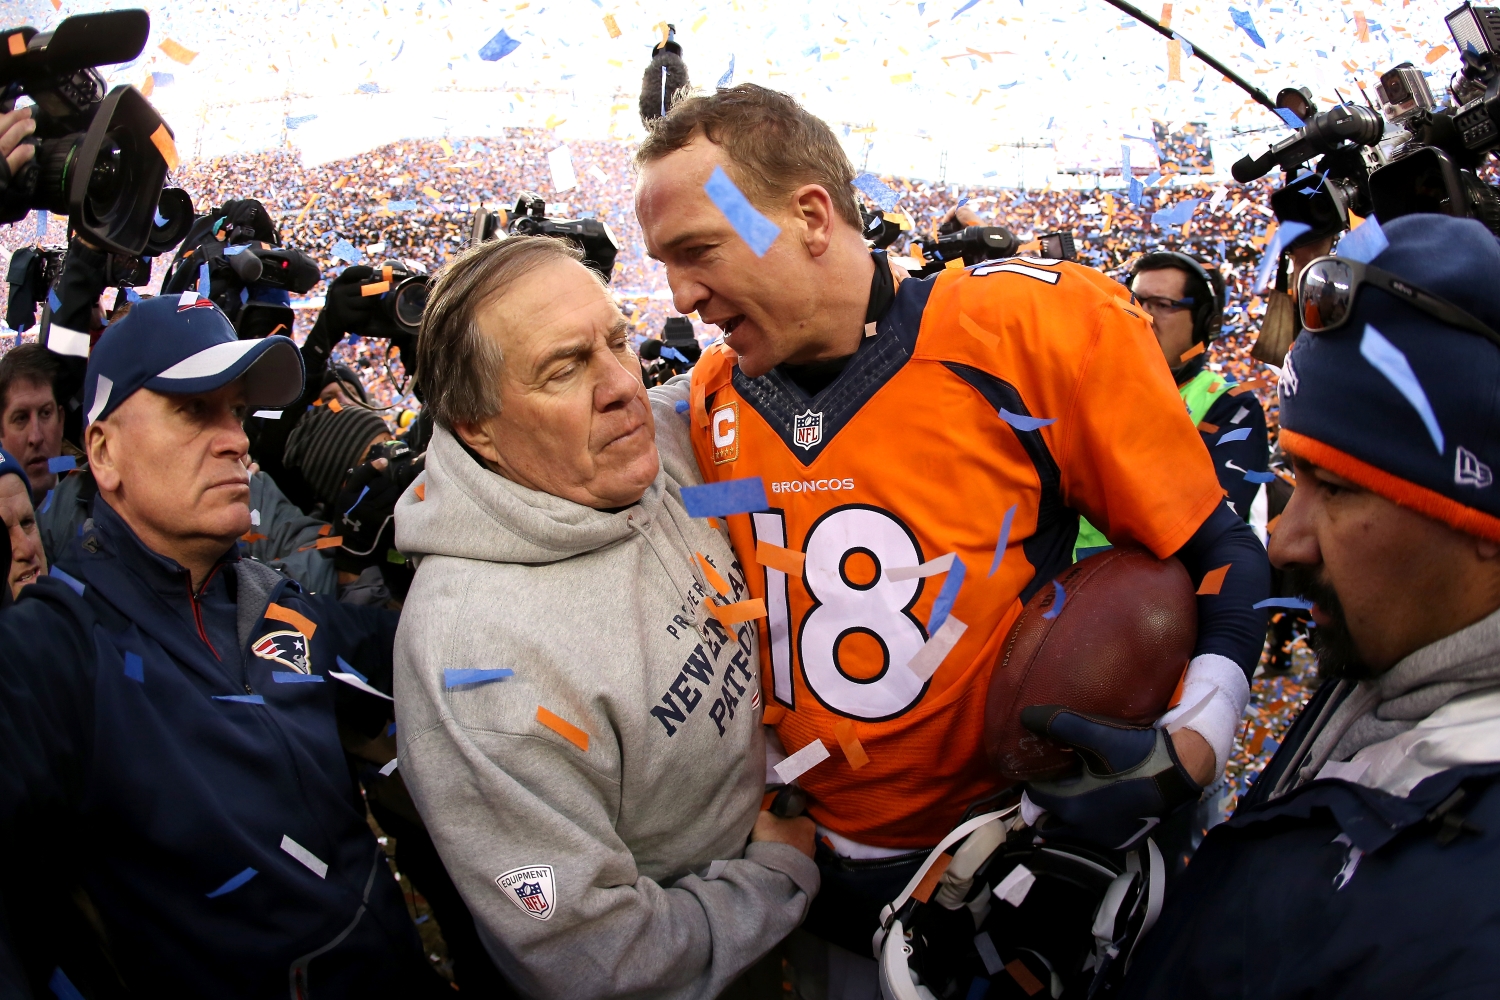 New England Patriots head coach Bill Belichick shakes hands with Denver Broncos quarterback Peyton Manning after the AFC Championship.